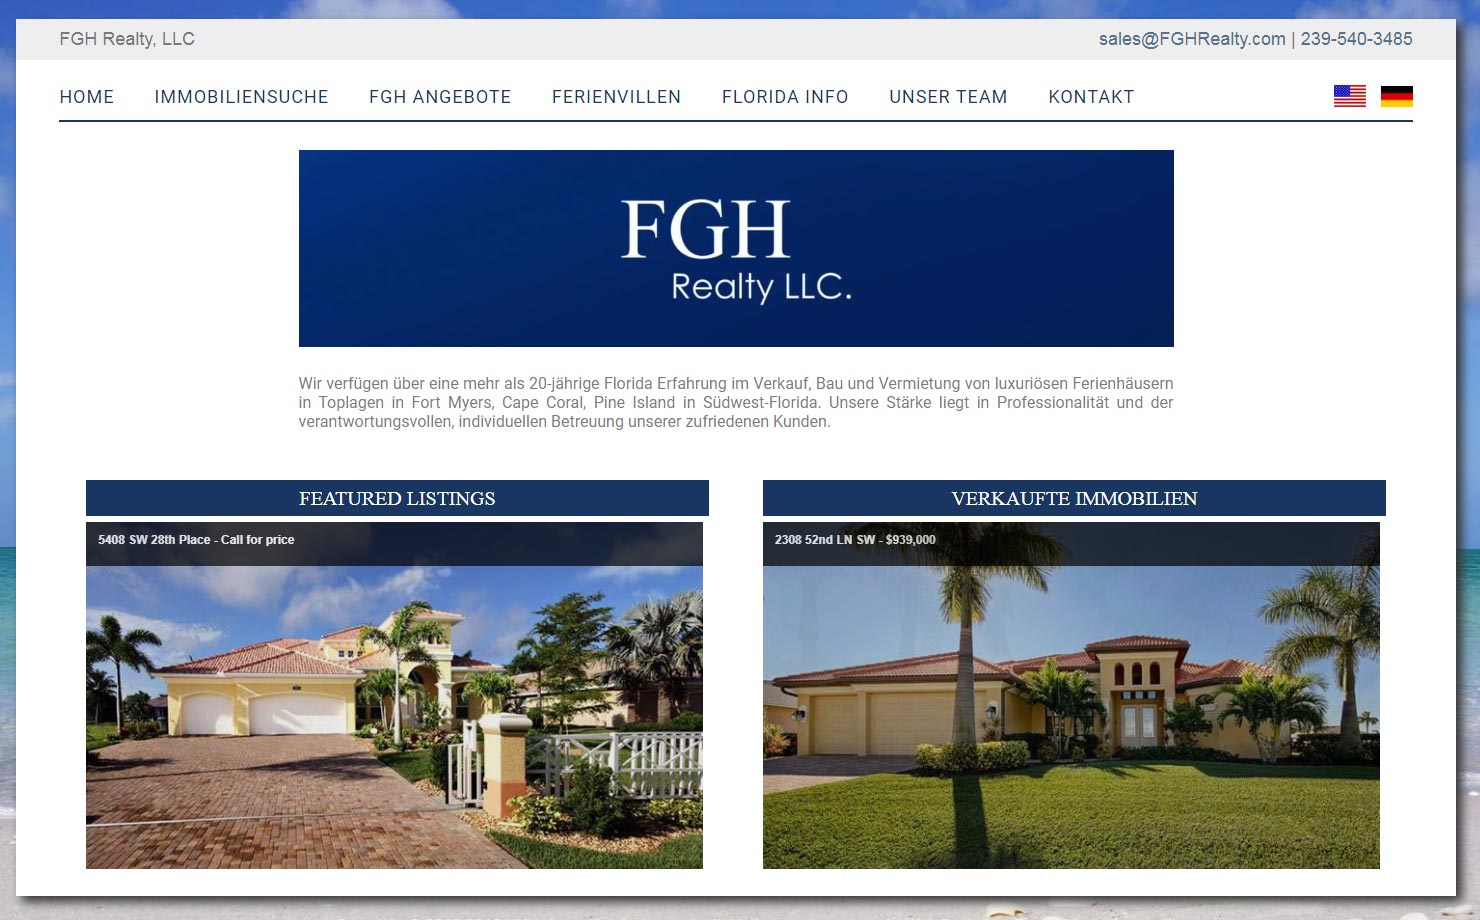 FGH Realty